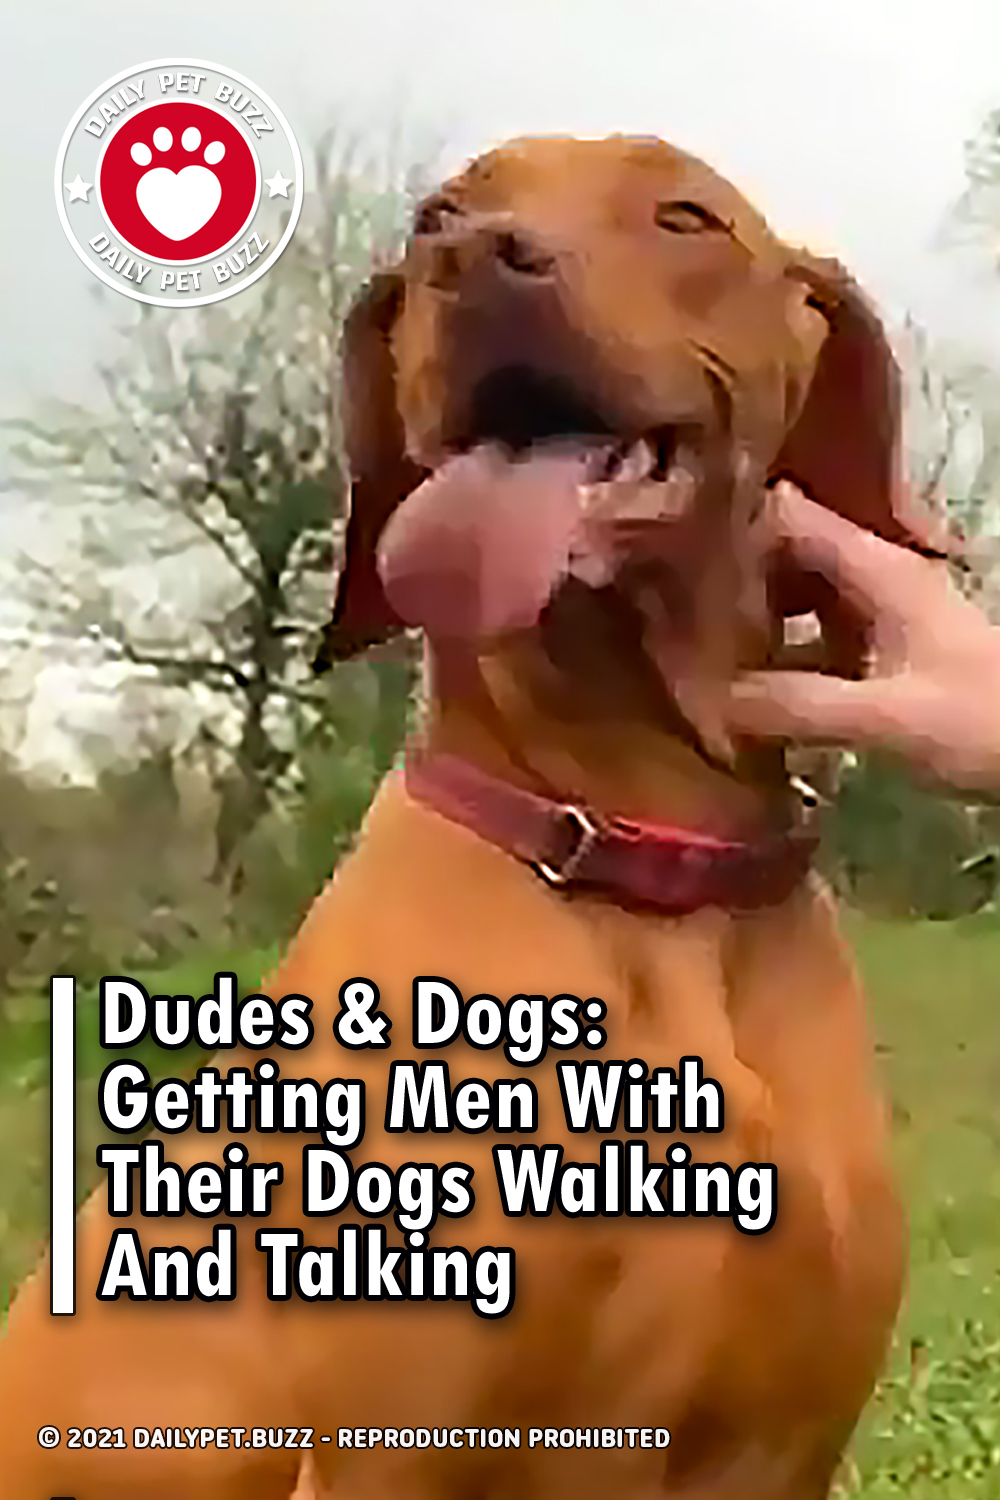 Dudes & Dogs: Getting Men With Their Dogs Walking And Talking